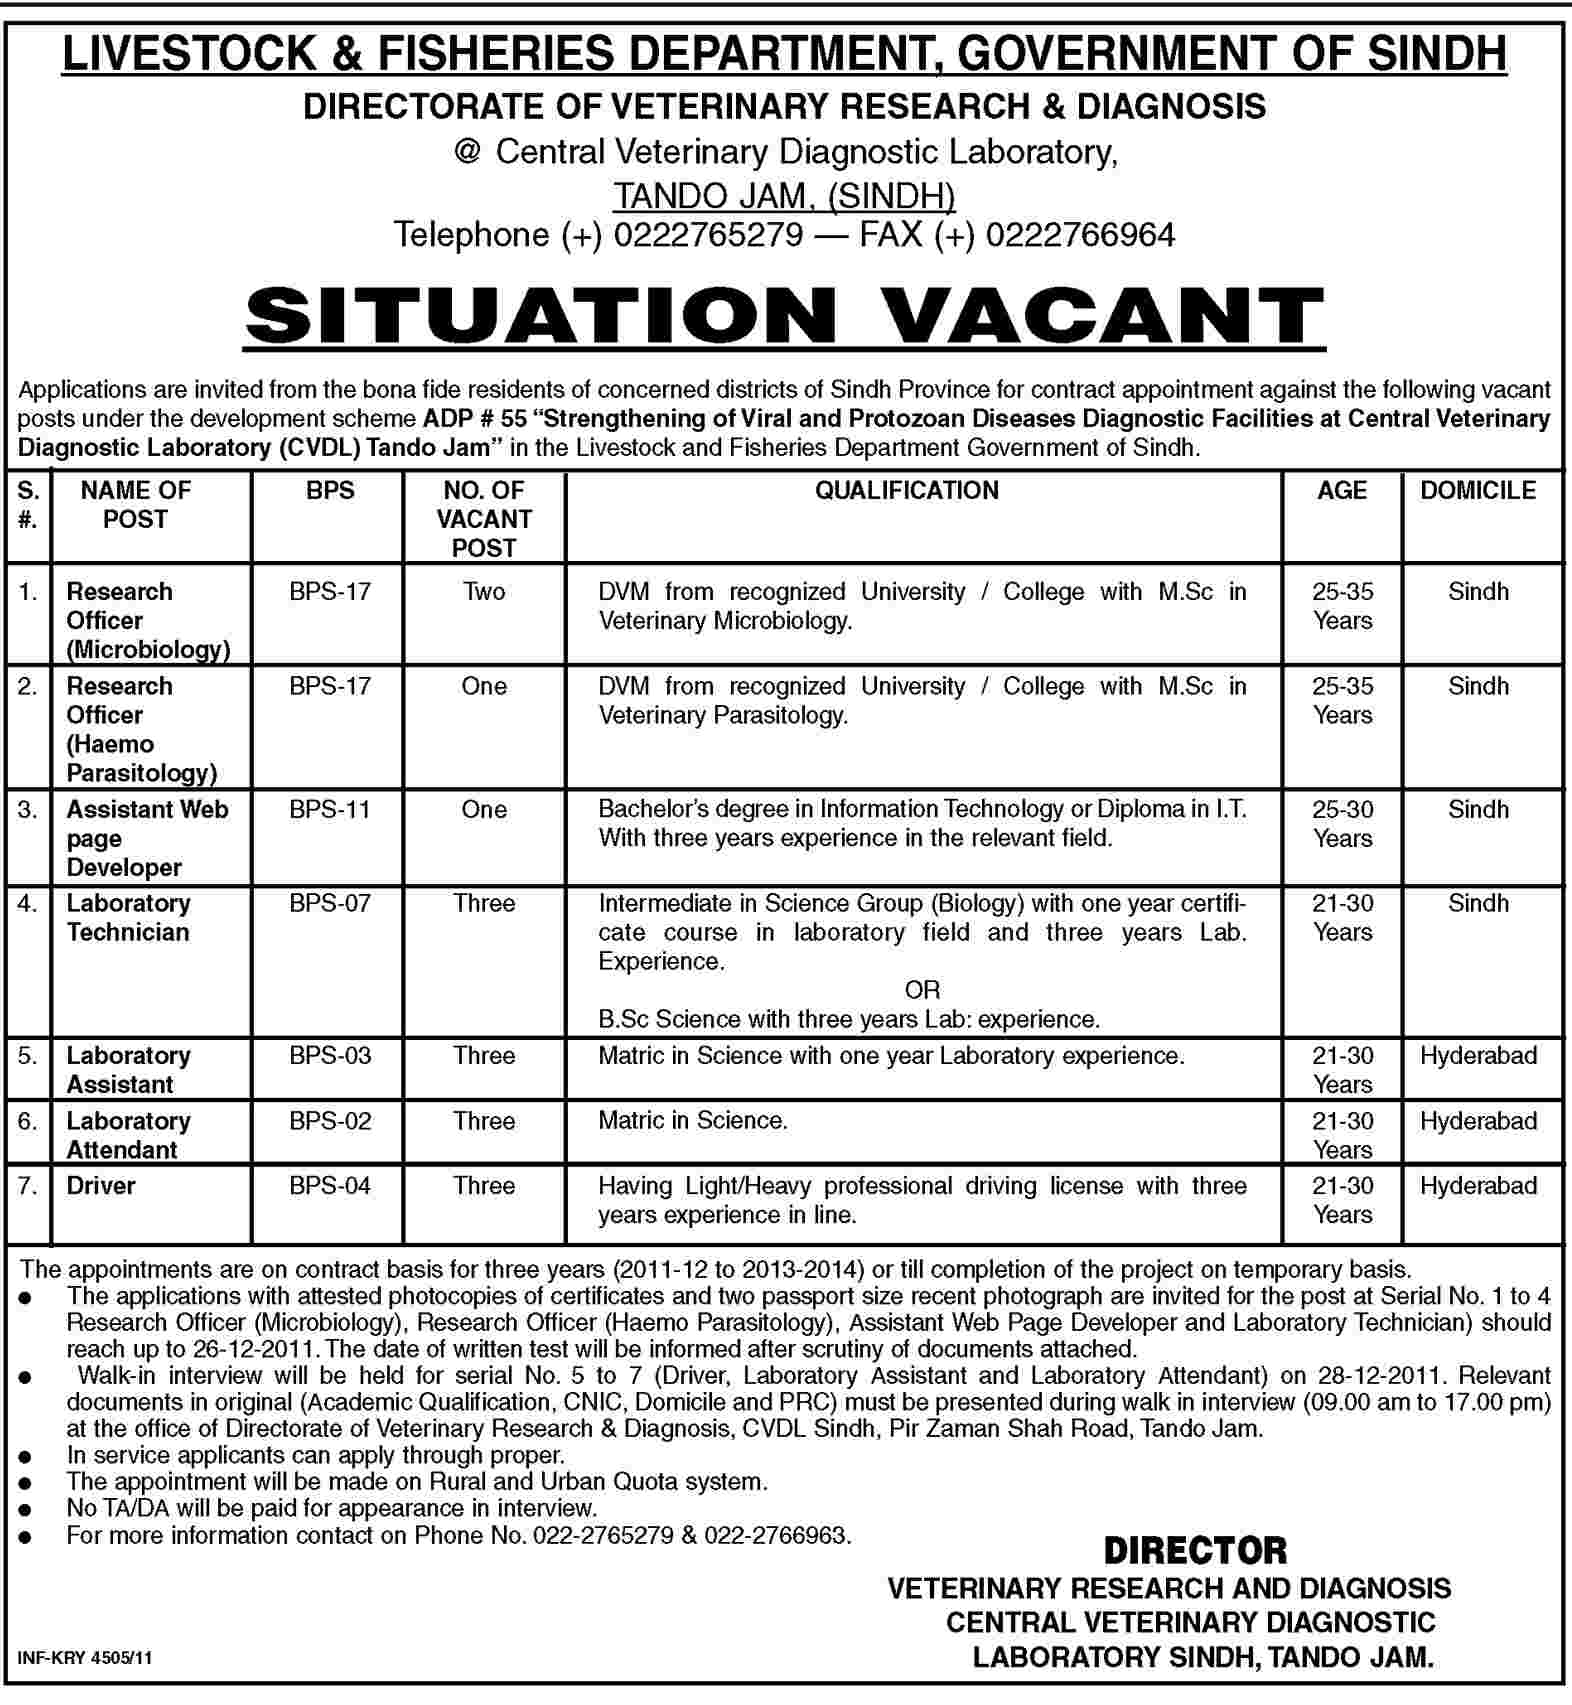 Livestock and Fisheries Department, Government of Sindh Jobs Opportunity